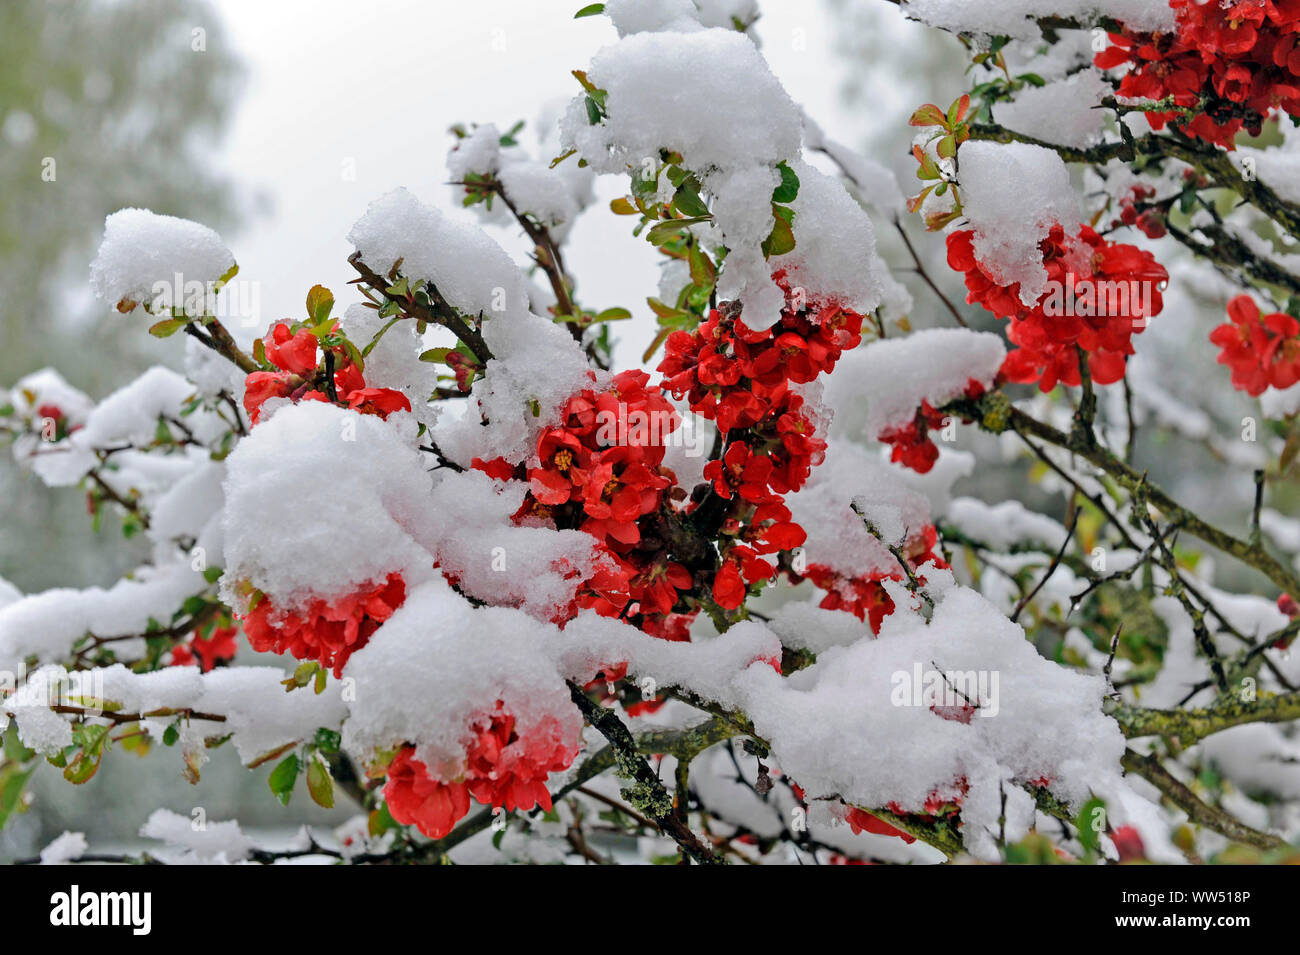 Fresh snowfall in postwinter covering the red blossoming shrub of the ornamental quince in spring garden Stock Photo